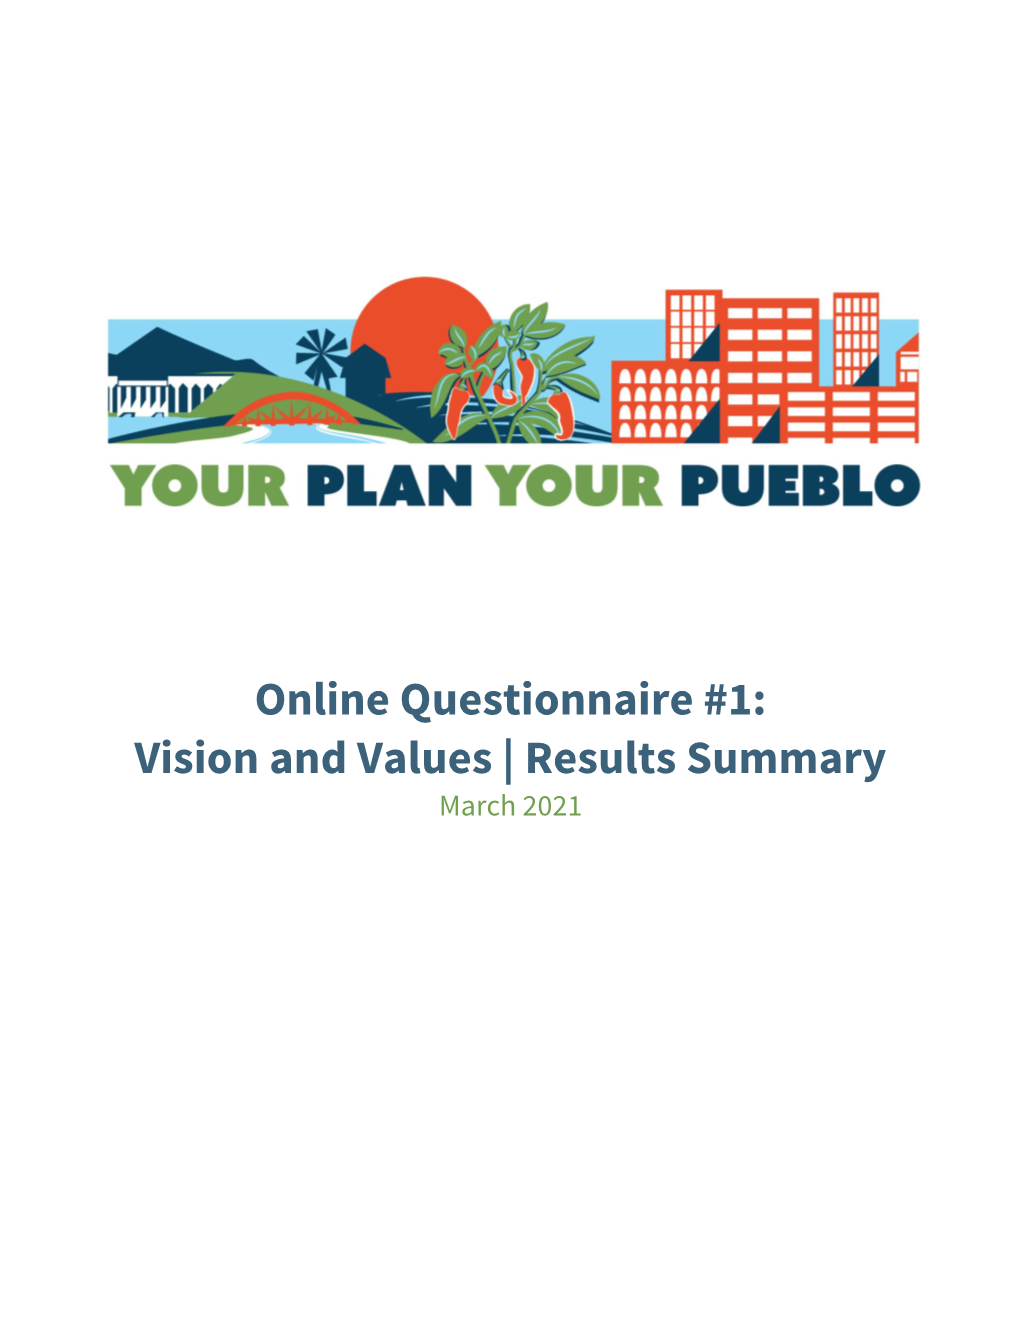 Vision and Values | Results Summary March 2021